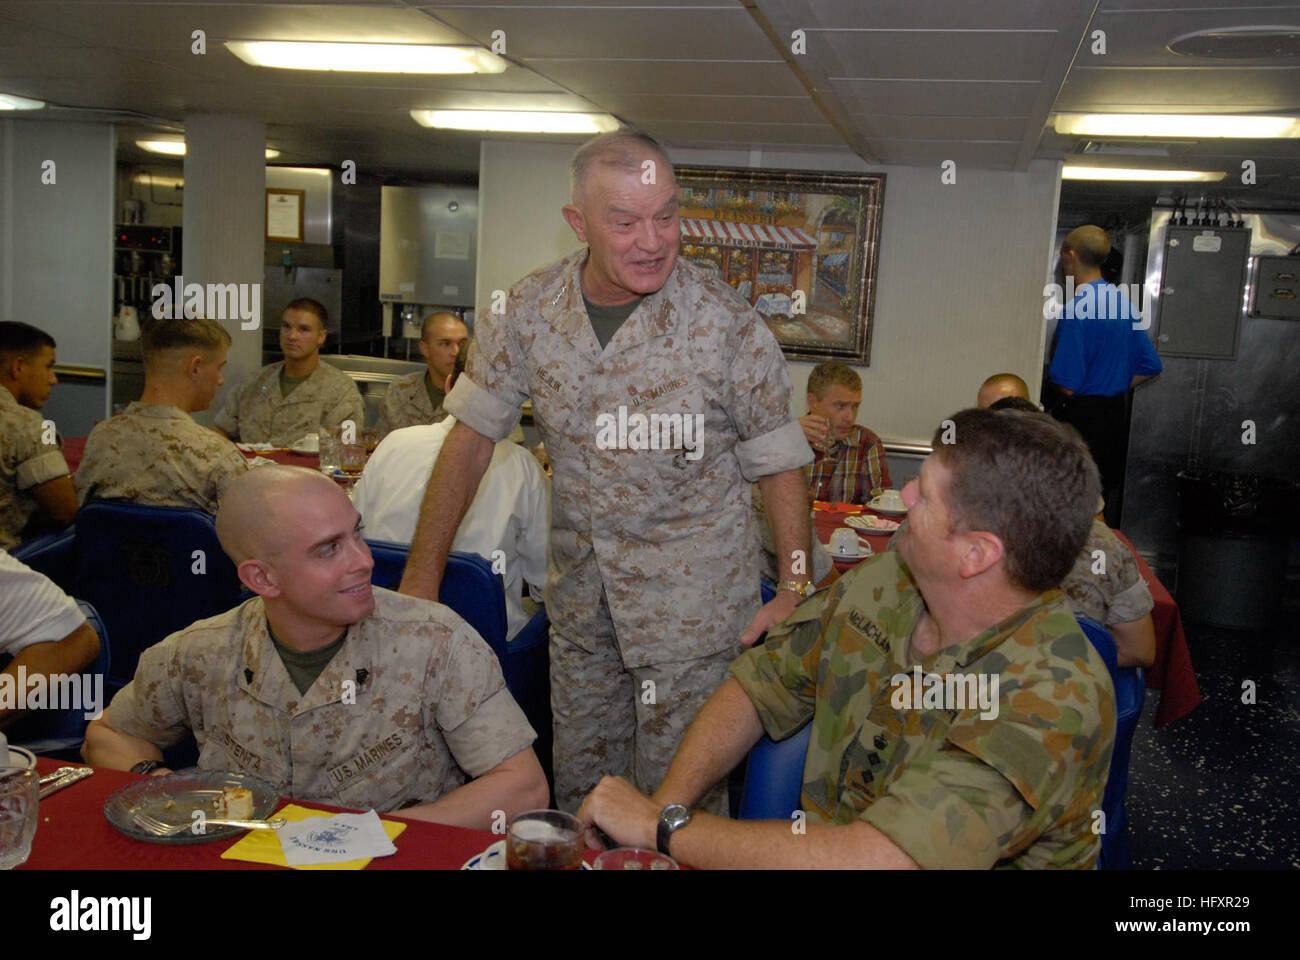 090828-N-3592S-126 ATLANTIC OCEAN (Aug. 28, 2009) Lt. Gen. Dennis Hejlik, commanding general of the 2nd Marine Expeditionary Force, speaks with Australian Army Brig. Gen. (Sel.) Fergus McLachlan and Sgt. Nicholas Stenta in the wardroom of the amphibious assault ship USS Nassau (LHA 4) during a Quadrennial Defense Review visit. (U.S. Navy photo by Mass Communication Specialist 1st Class James R. Stilipec/Released) US Navy 090828-N-3592S-126 Lt. Gen. Dennis Hejlik, commanding general of the 2nd Marine Expeditionary Force, speaks with Australian Army Brig. Gen. (Sel.) Fergus McLachlan Stock Photo